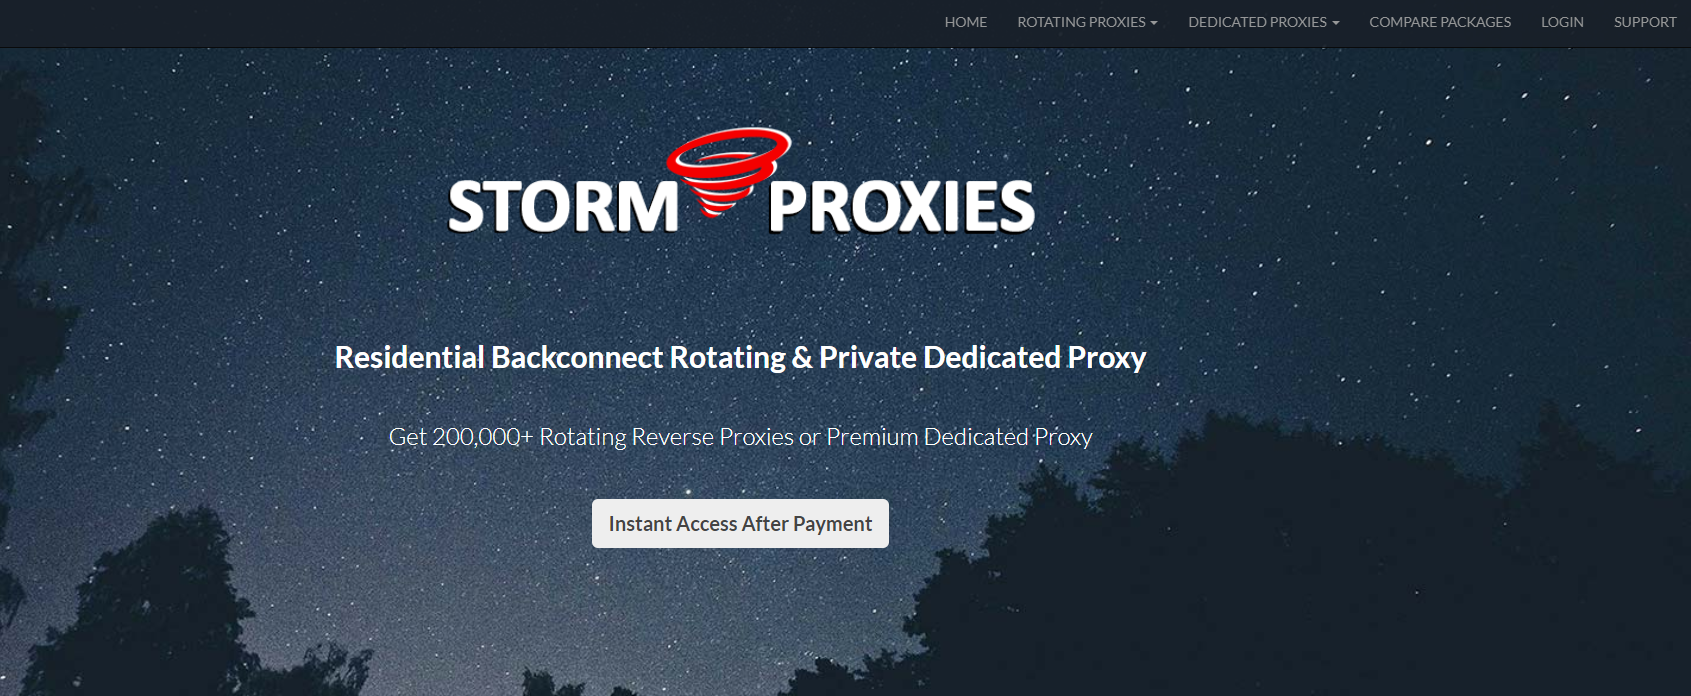 Storm Proxies Overview - Best Rotating Proxy